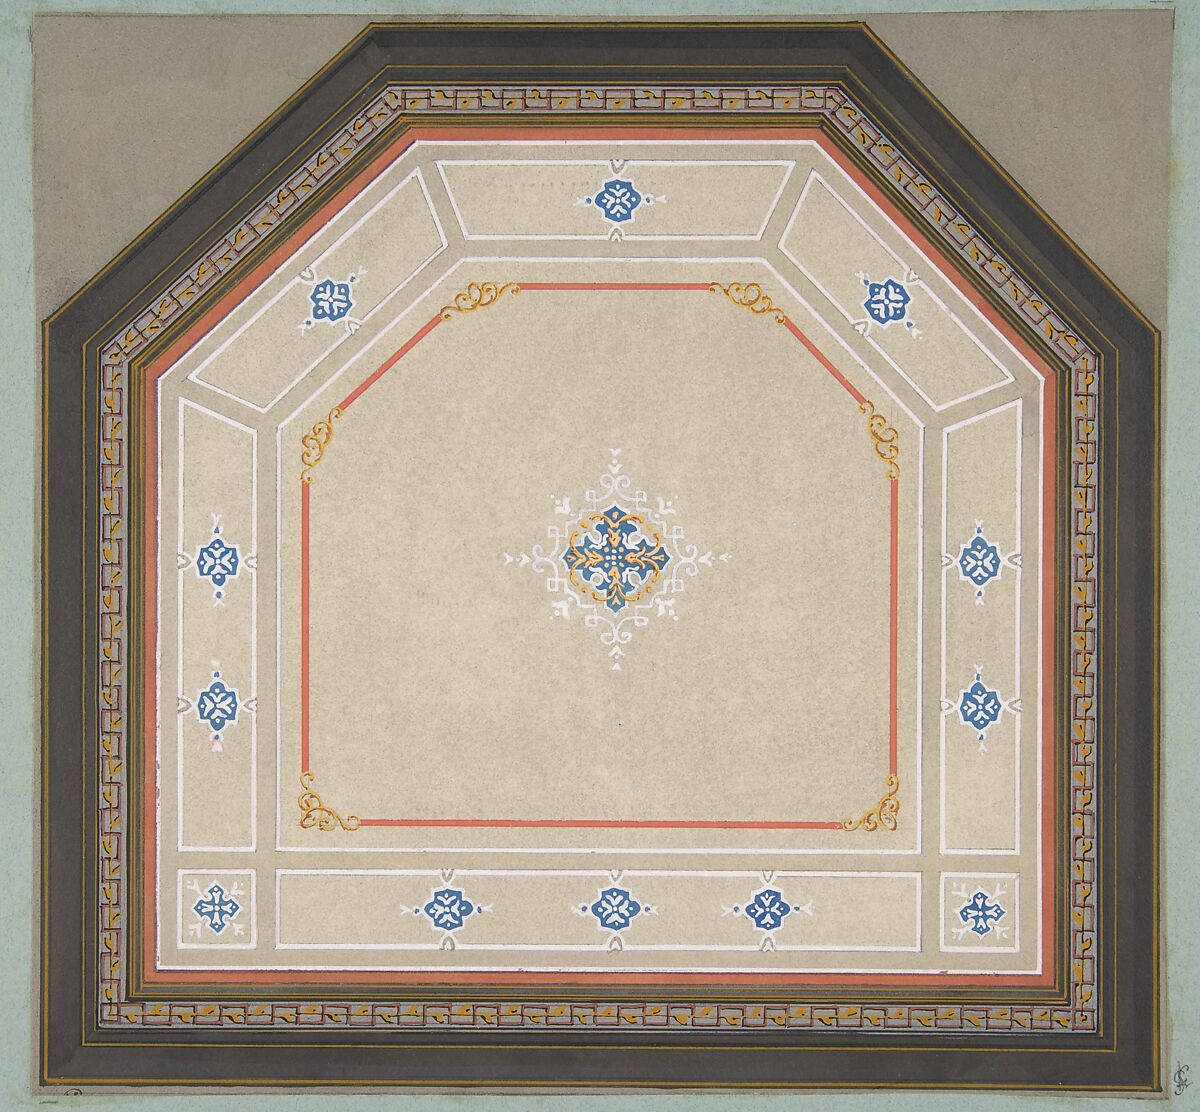 Design for the decoration of a pentagonal ceiling, Jules-Edmond-Charles Lachaise (French, died 1897), pen and ink, watercolor, and gouache on wove paper; mounted on blue wove paper 